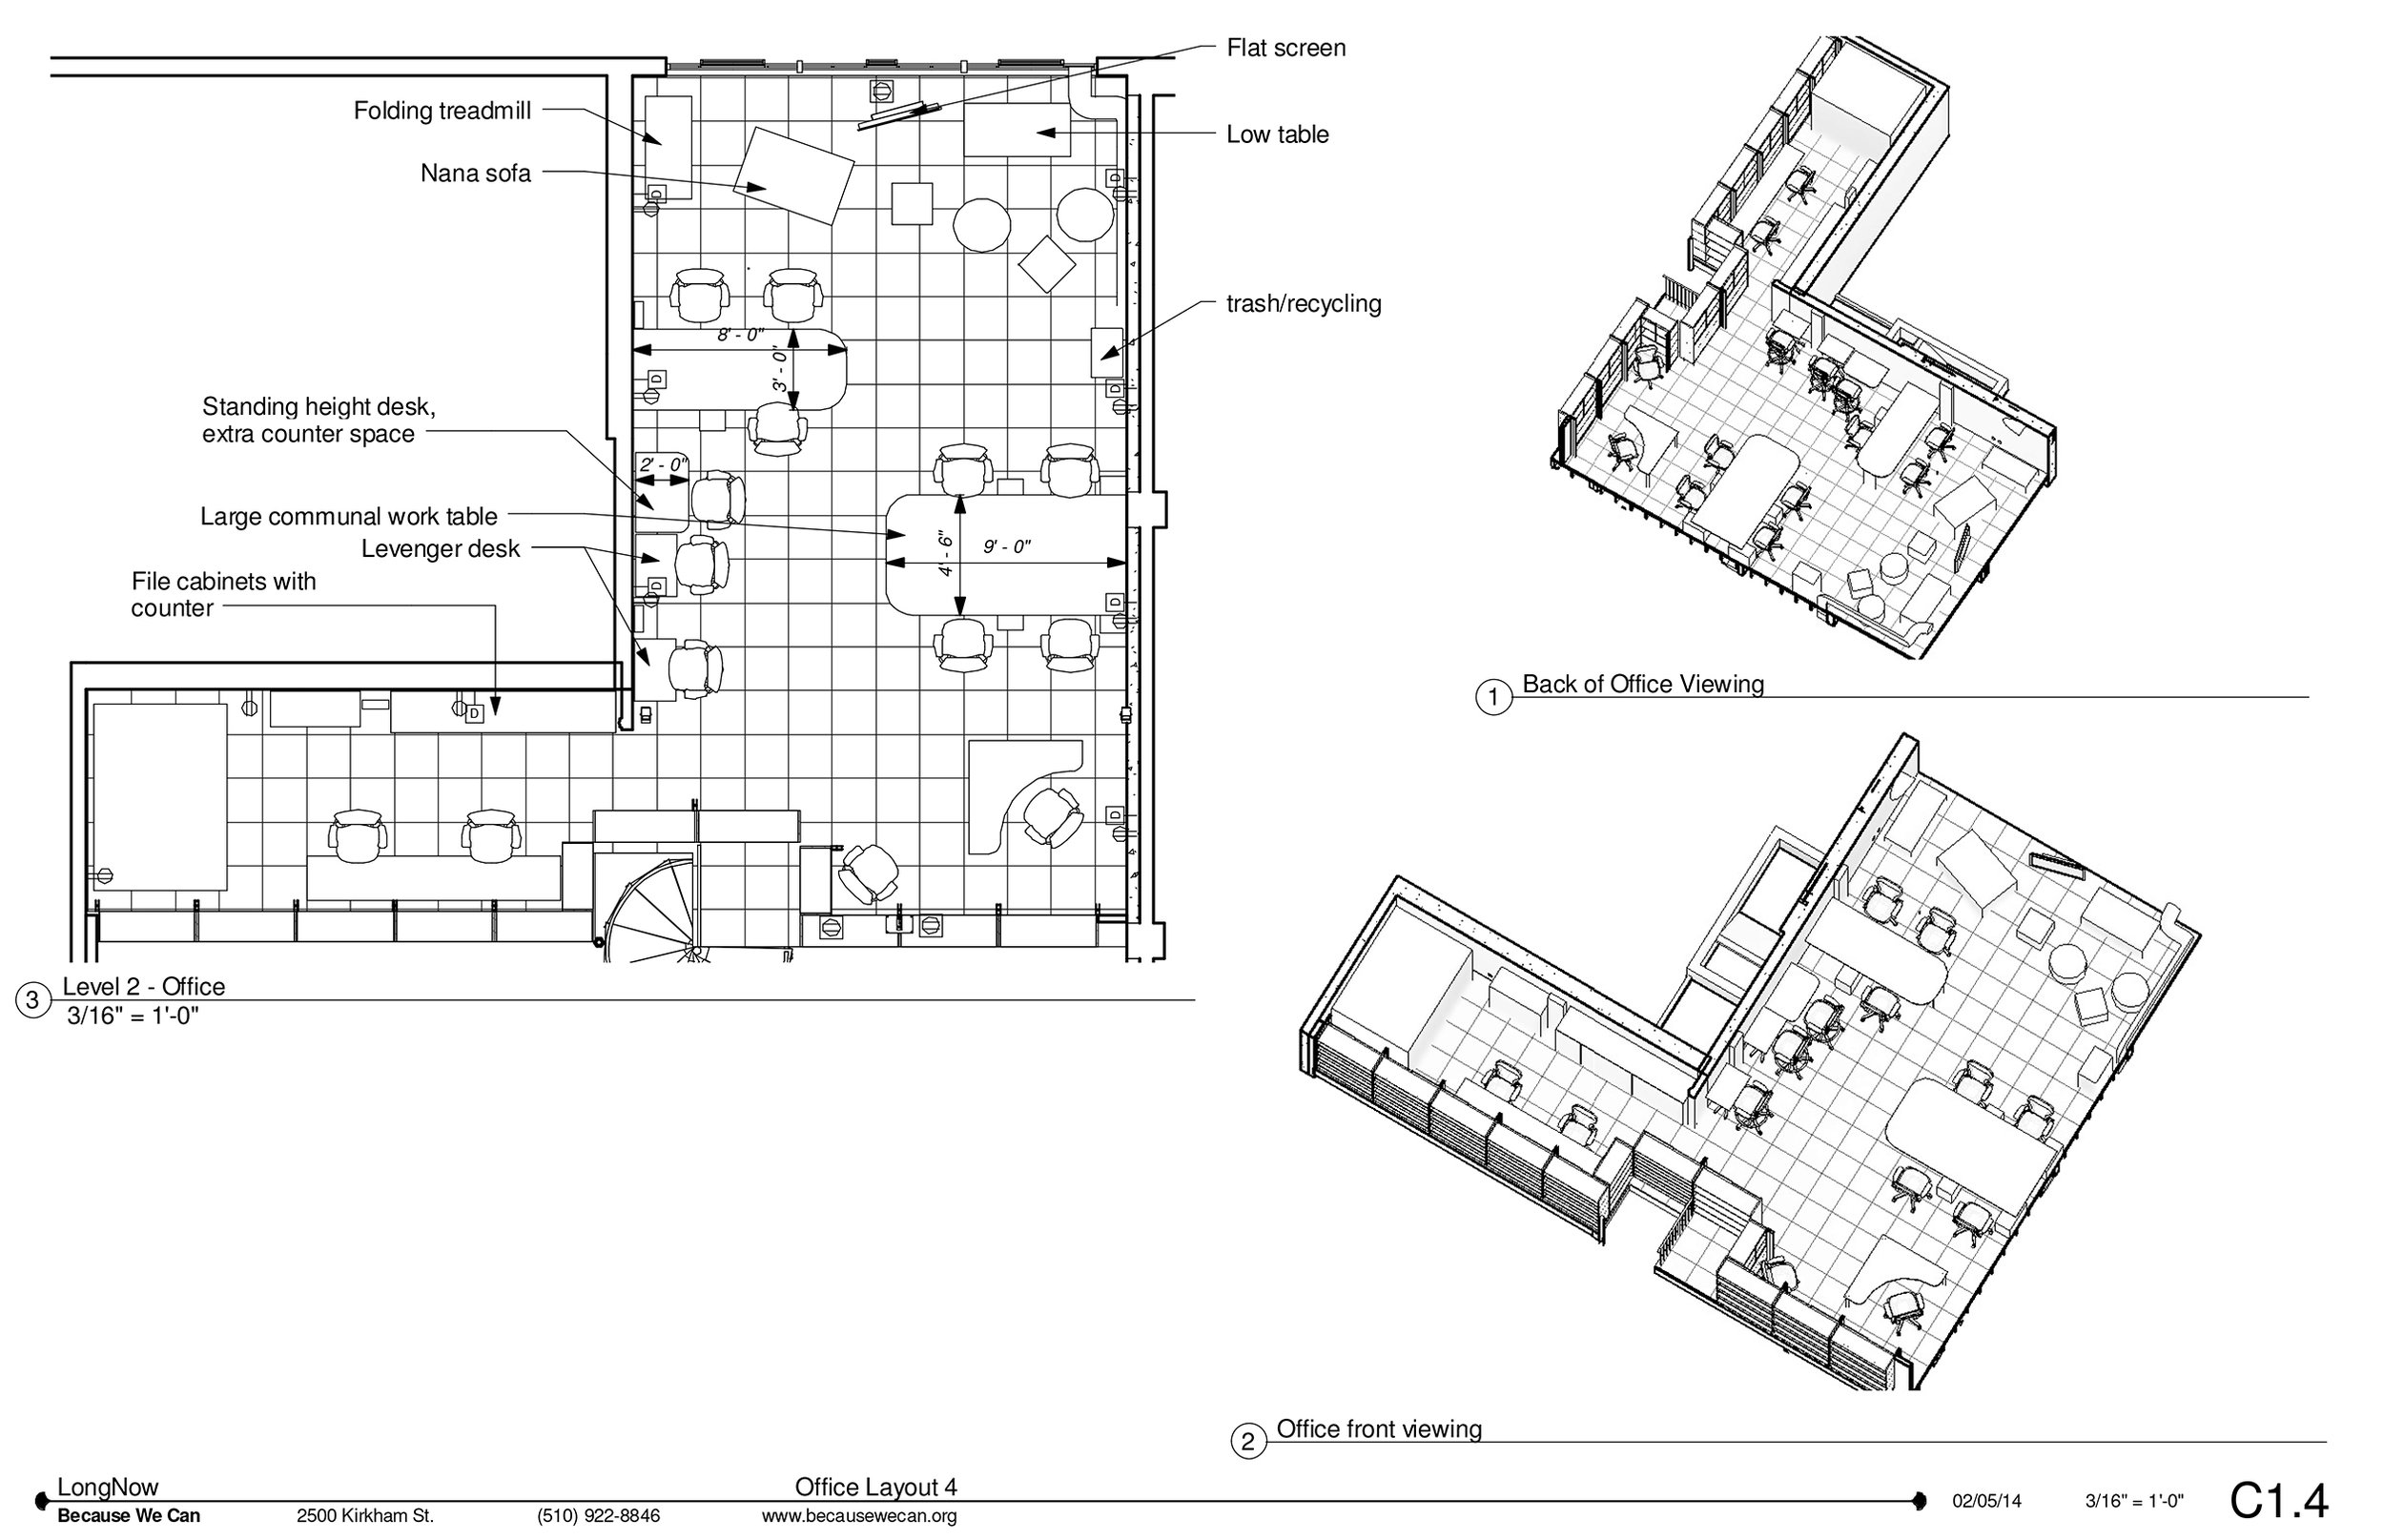  Floor plan of the upstairs office, we allowed flex space and floating desks in this small office floor plan. 